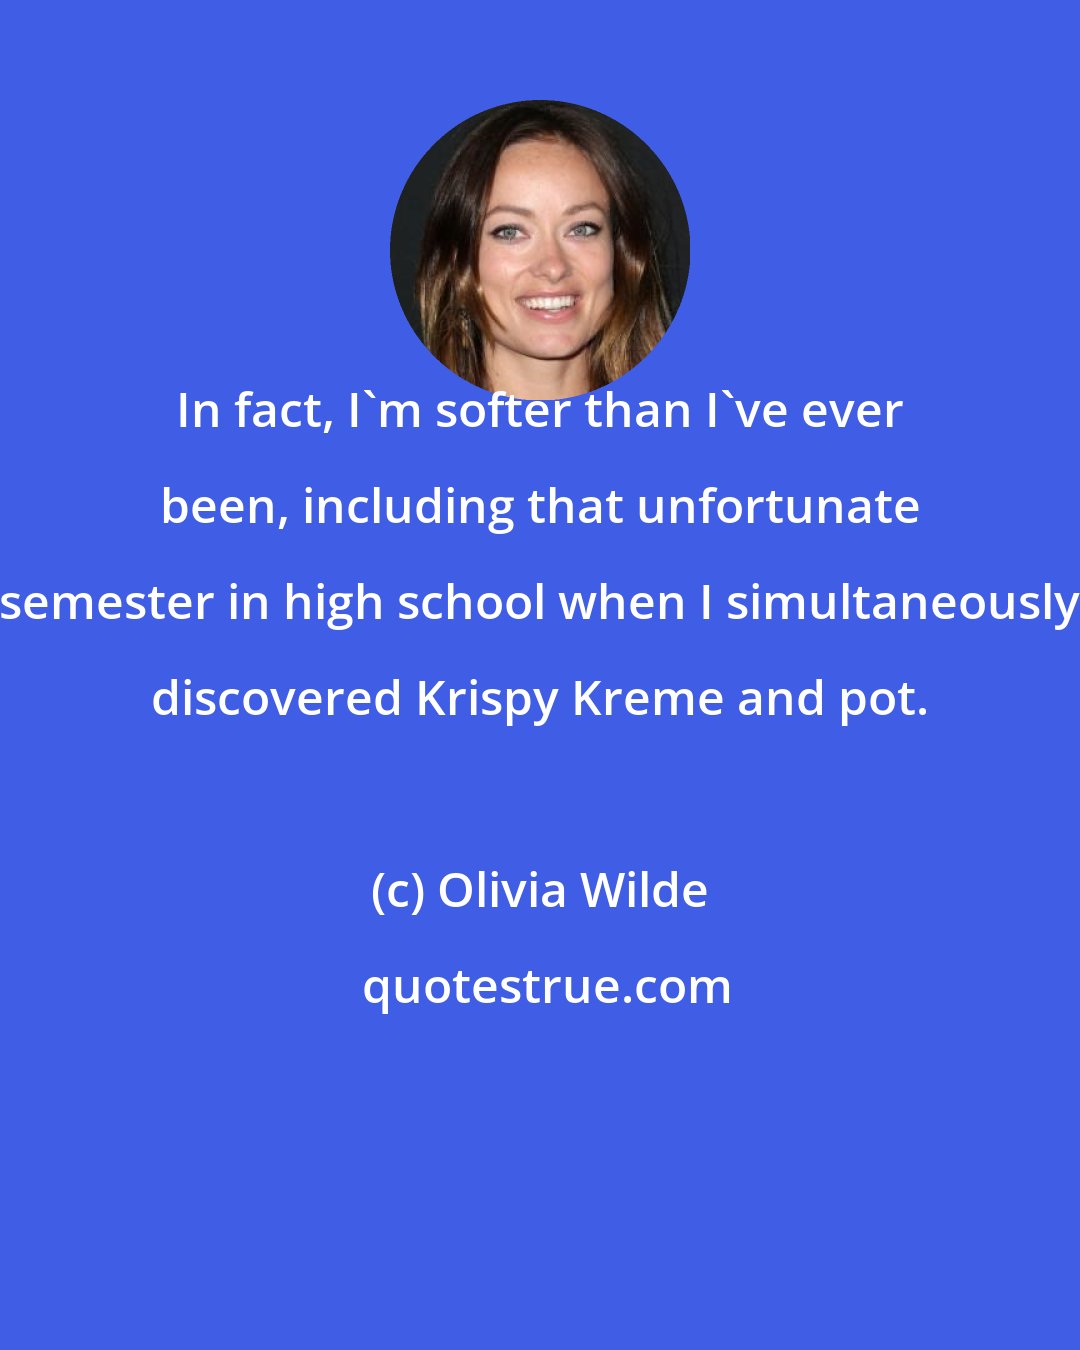 Olivia Wilde: In fact, I'm softer than I've ever been, including that unfortunate semester in high school when I simultaneously discovered Krispy Kreme and pot.